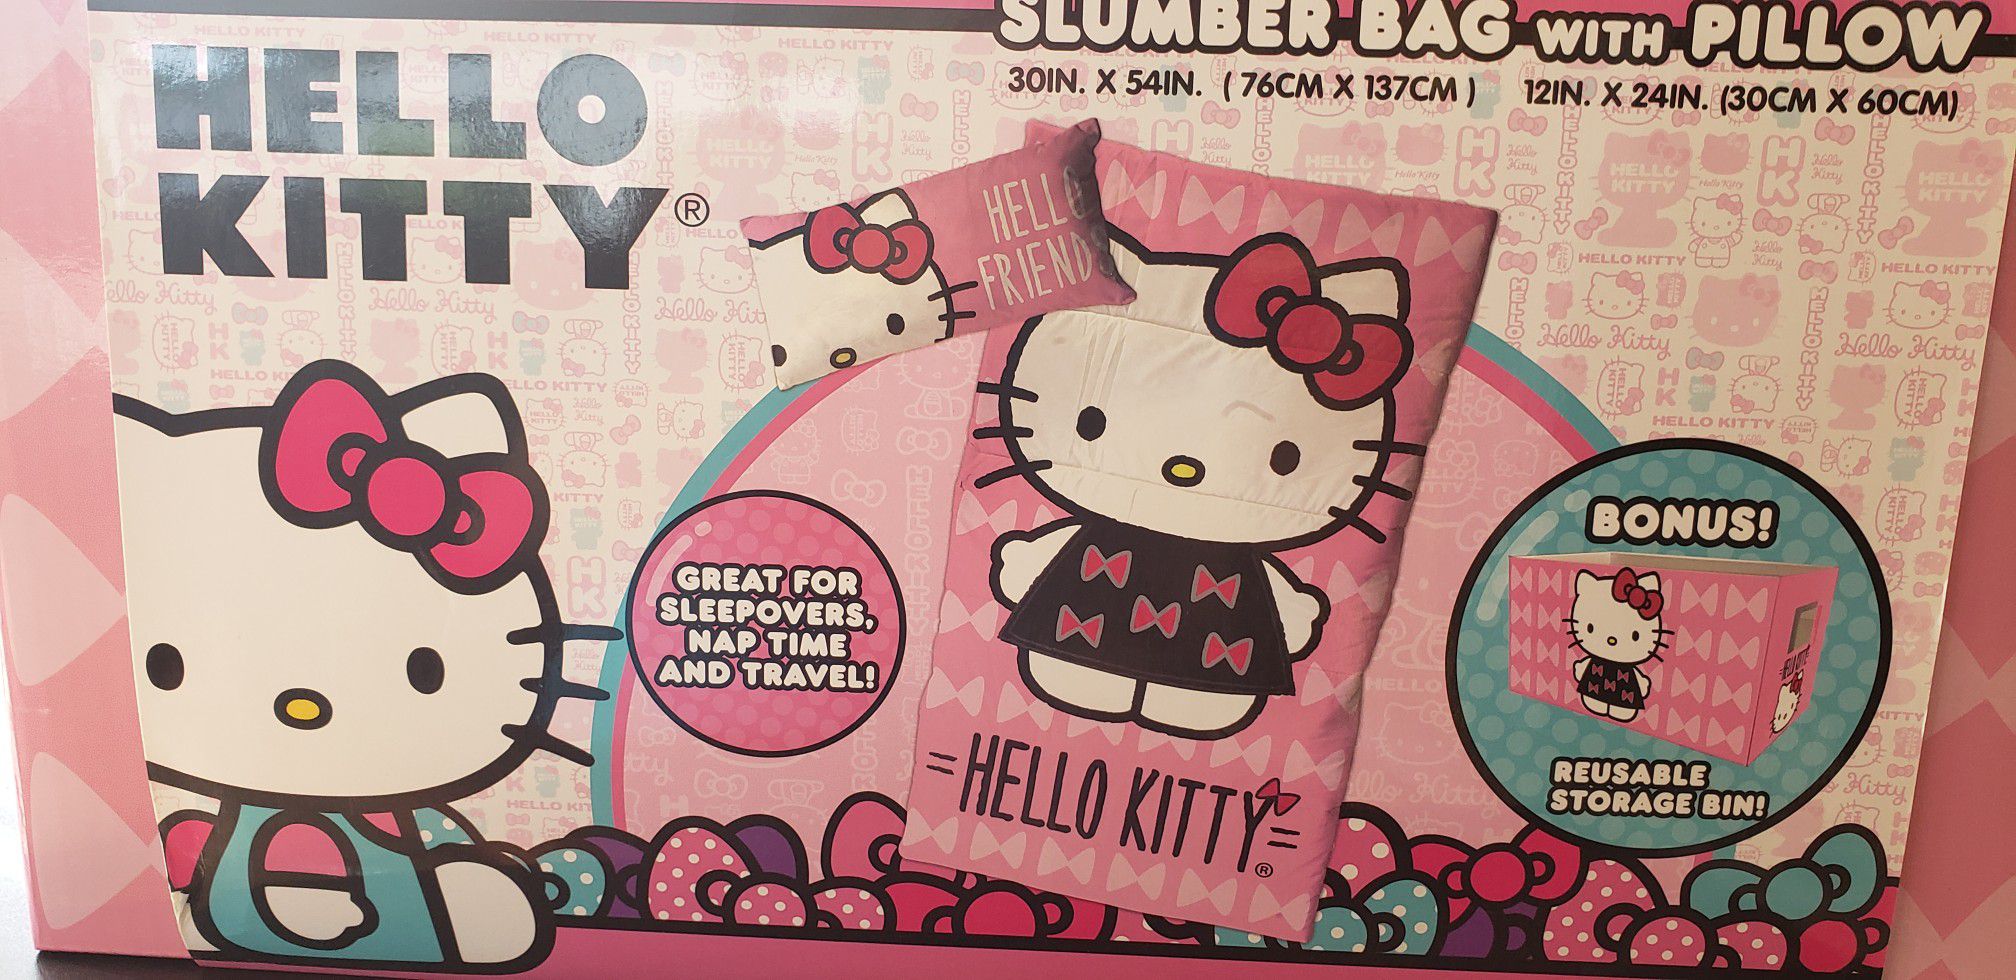 Hello Kitty Sumber bag and Pillow, New in box with reusable bin.